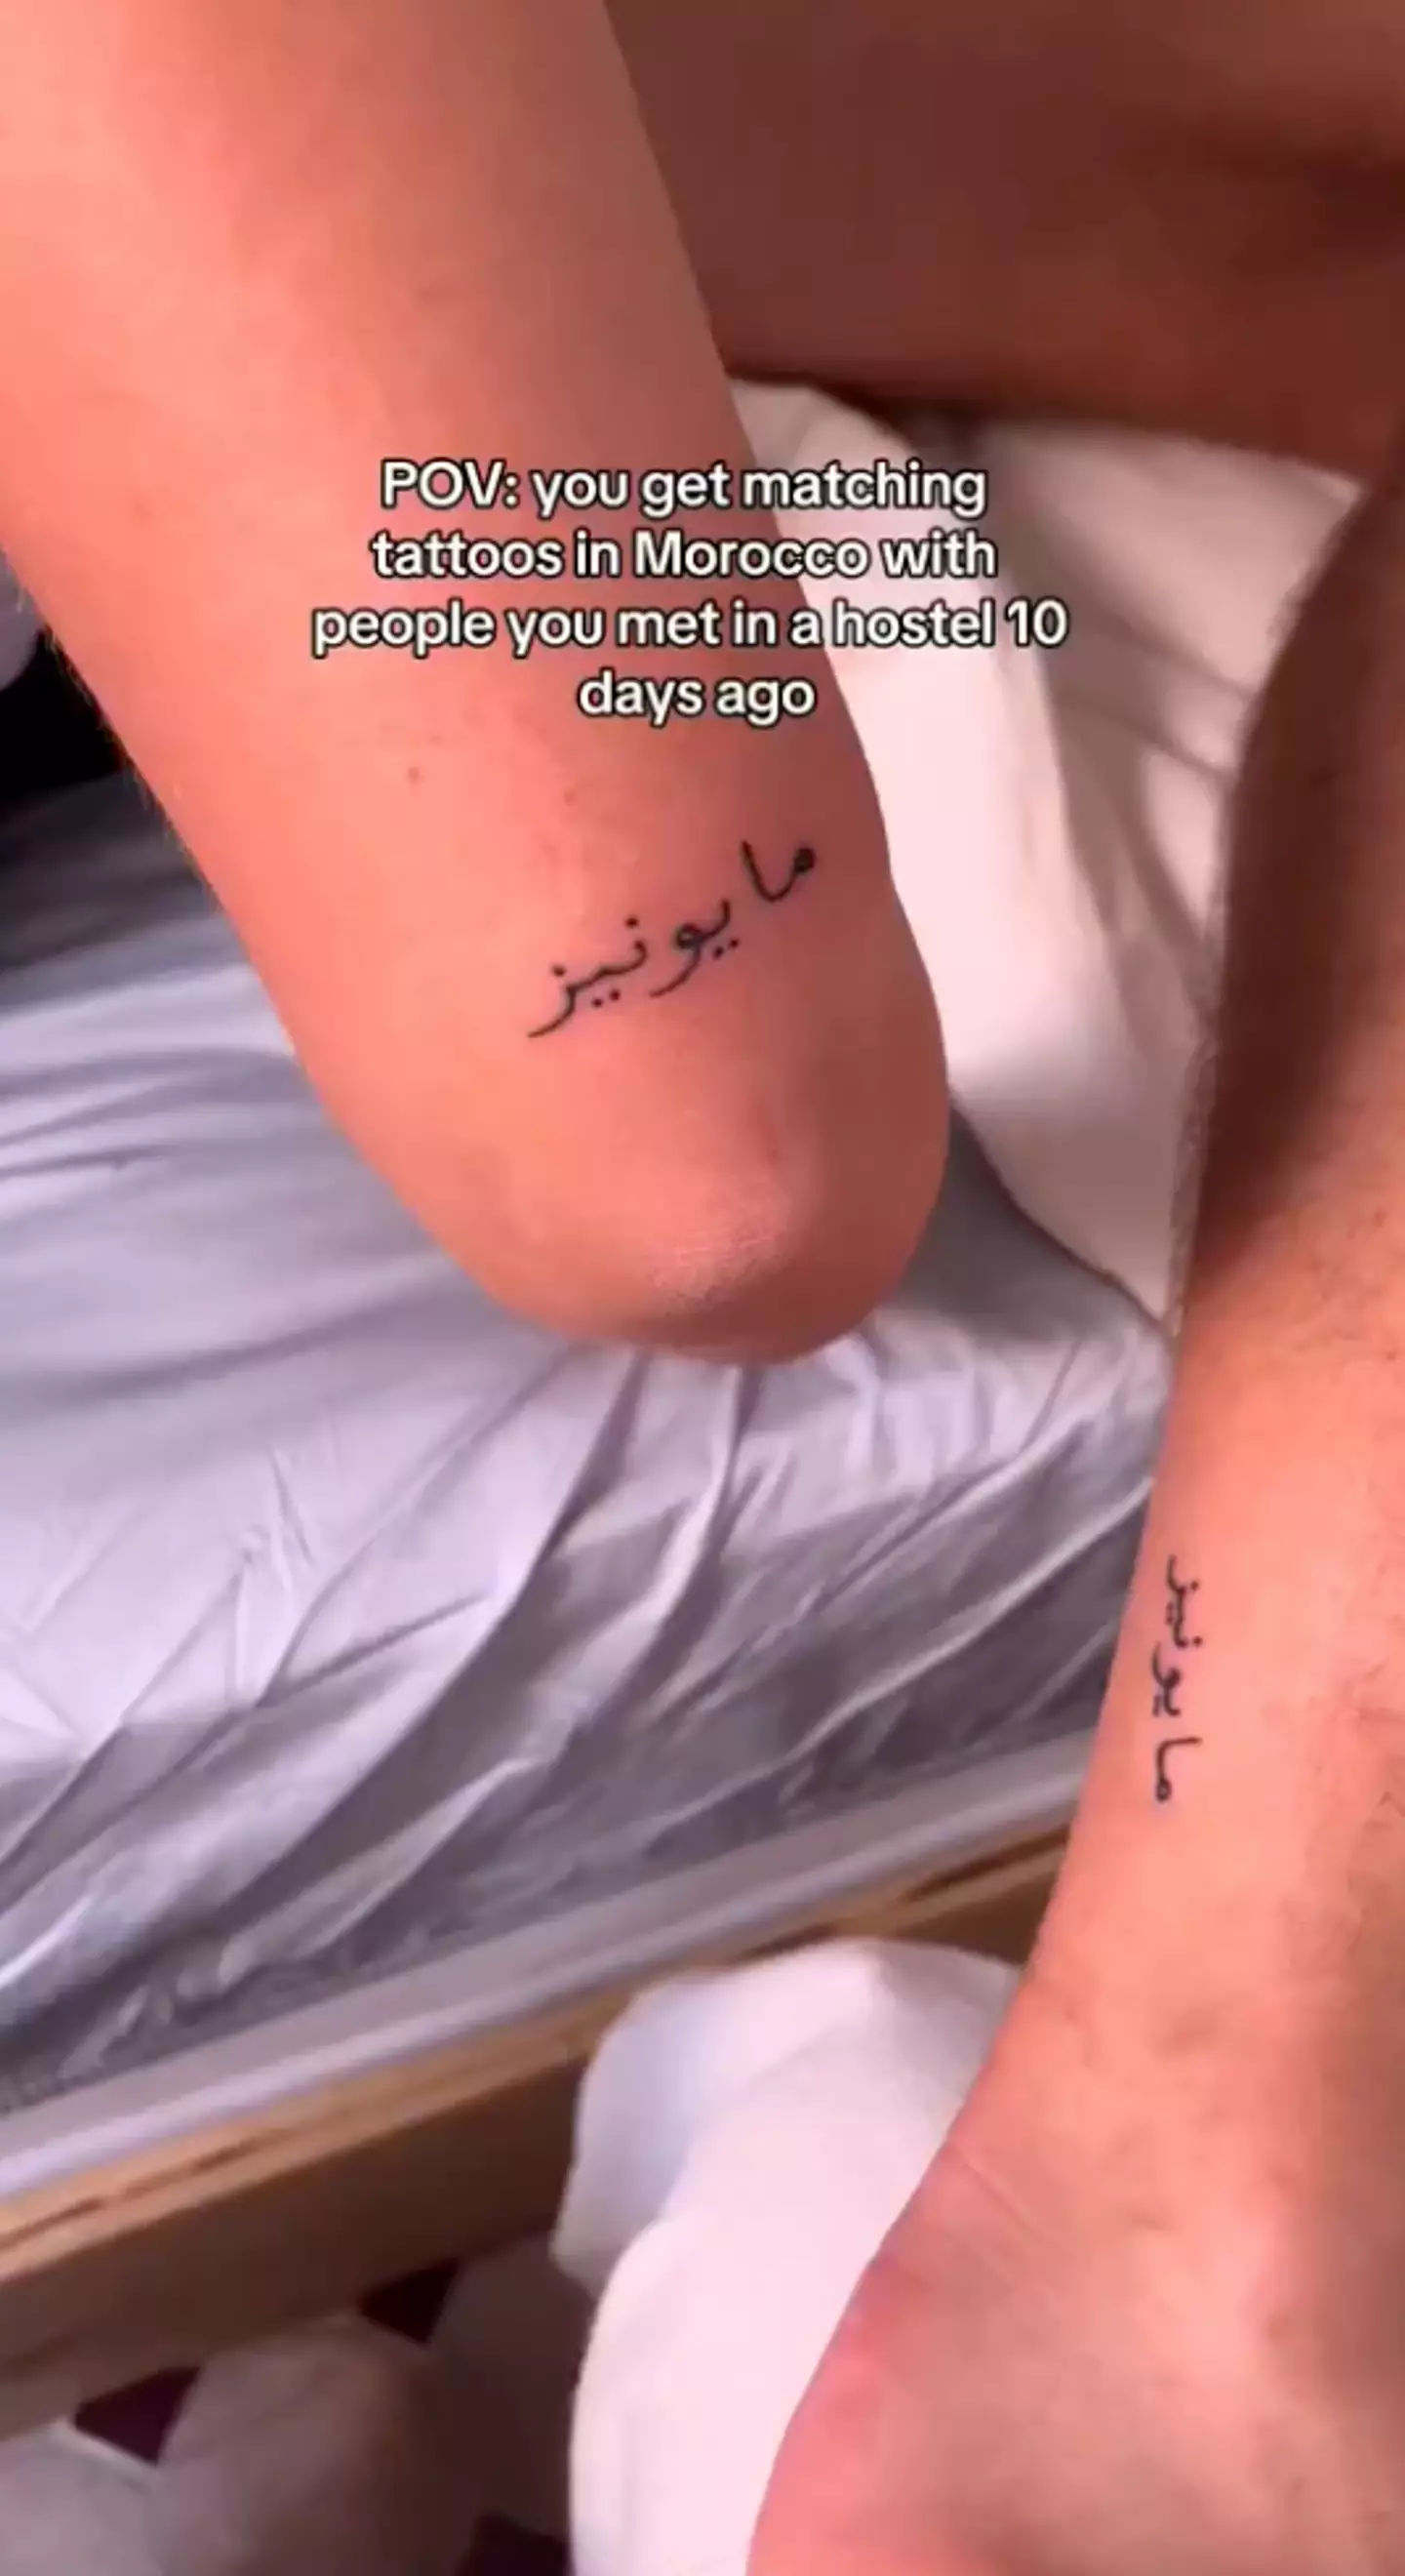 Over one million social media were stunned after tourist Caitlin Delphine showcased her tattoo on TikTok.